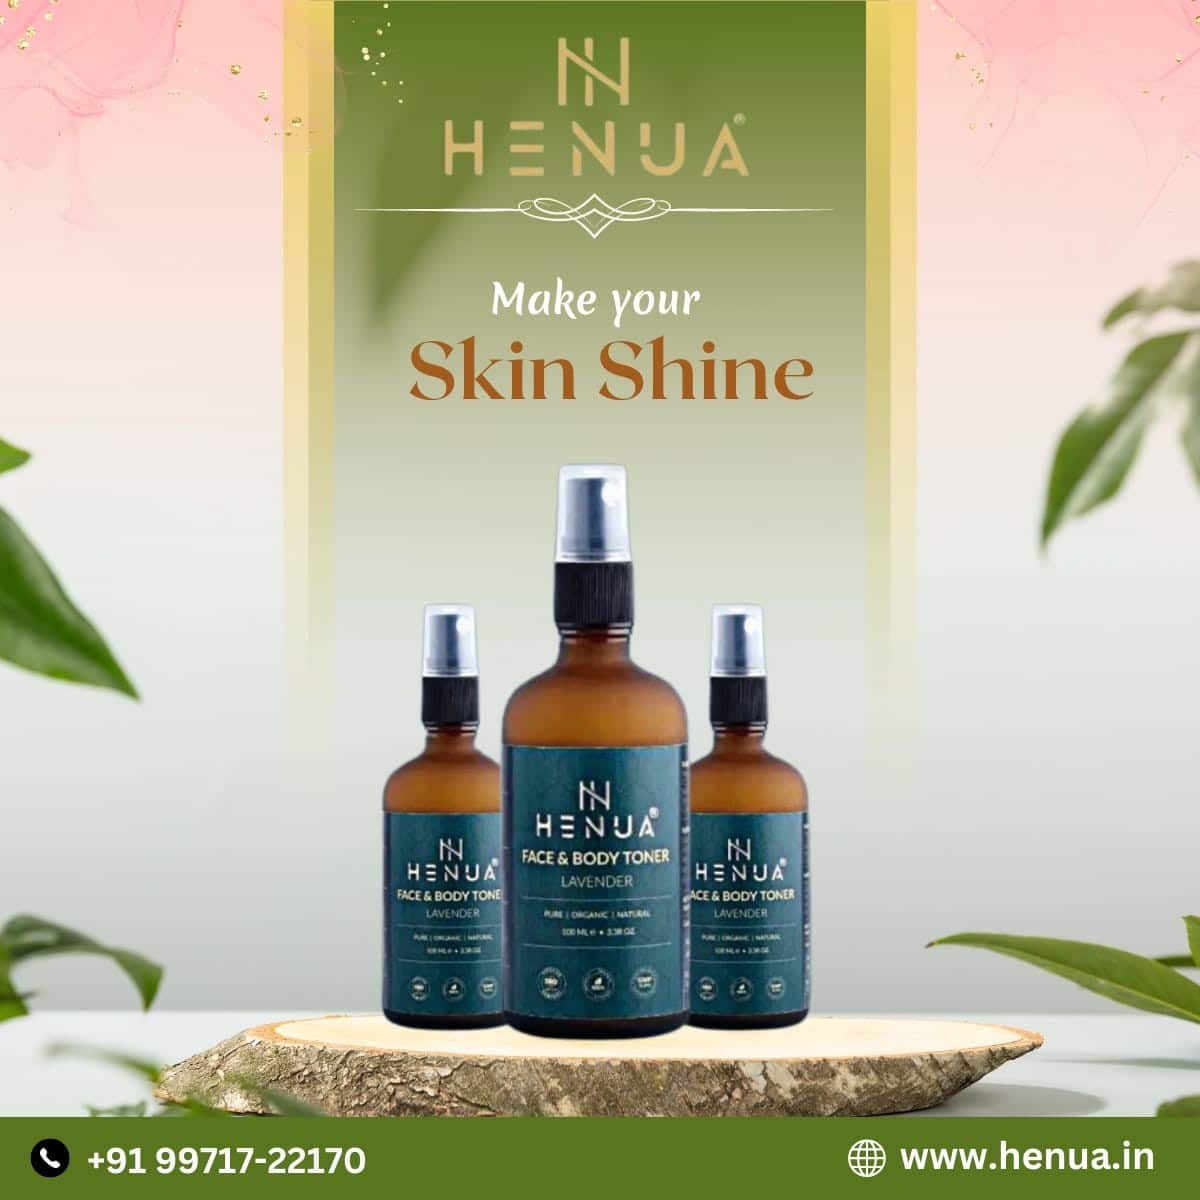 Make-Your-Skin-Shine-With-Henua-Face-And-Body-Toner